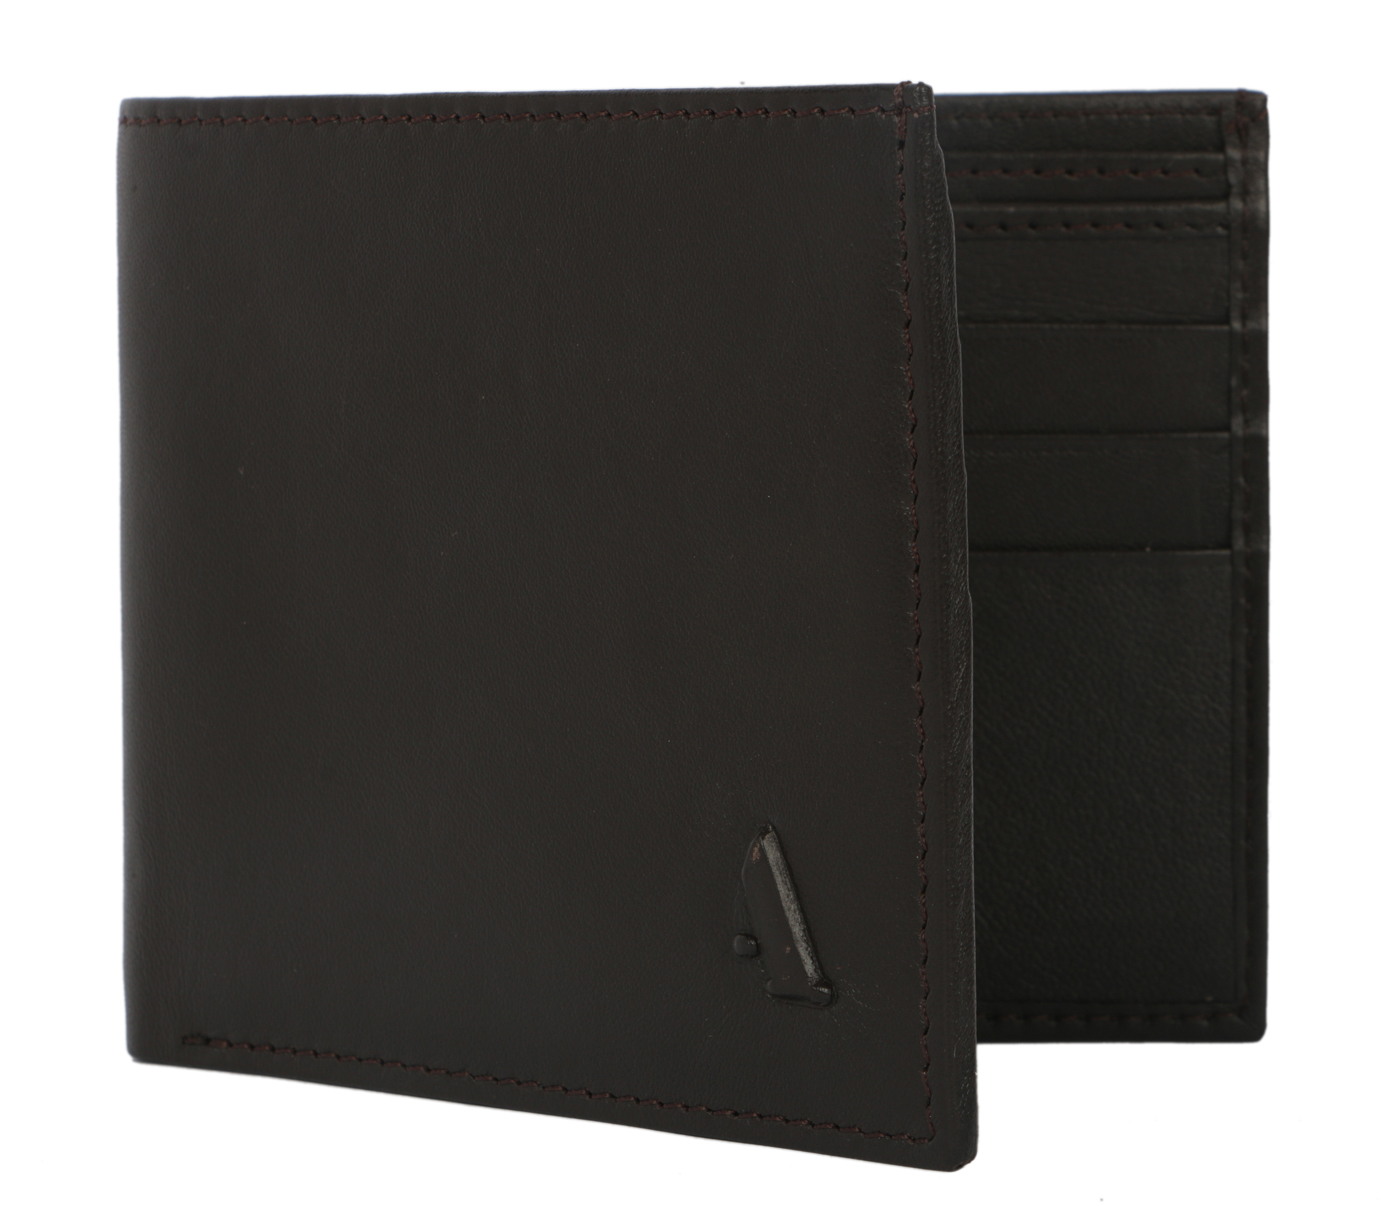 W41-Daniel-Men's bifold wallet with card pockets in Genuine Leather - Brown